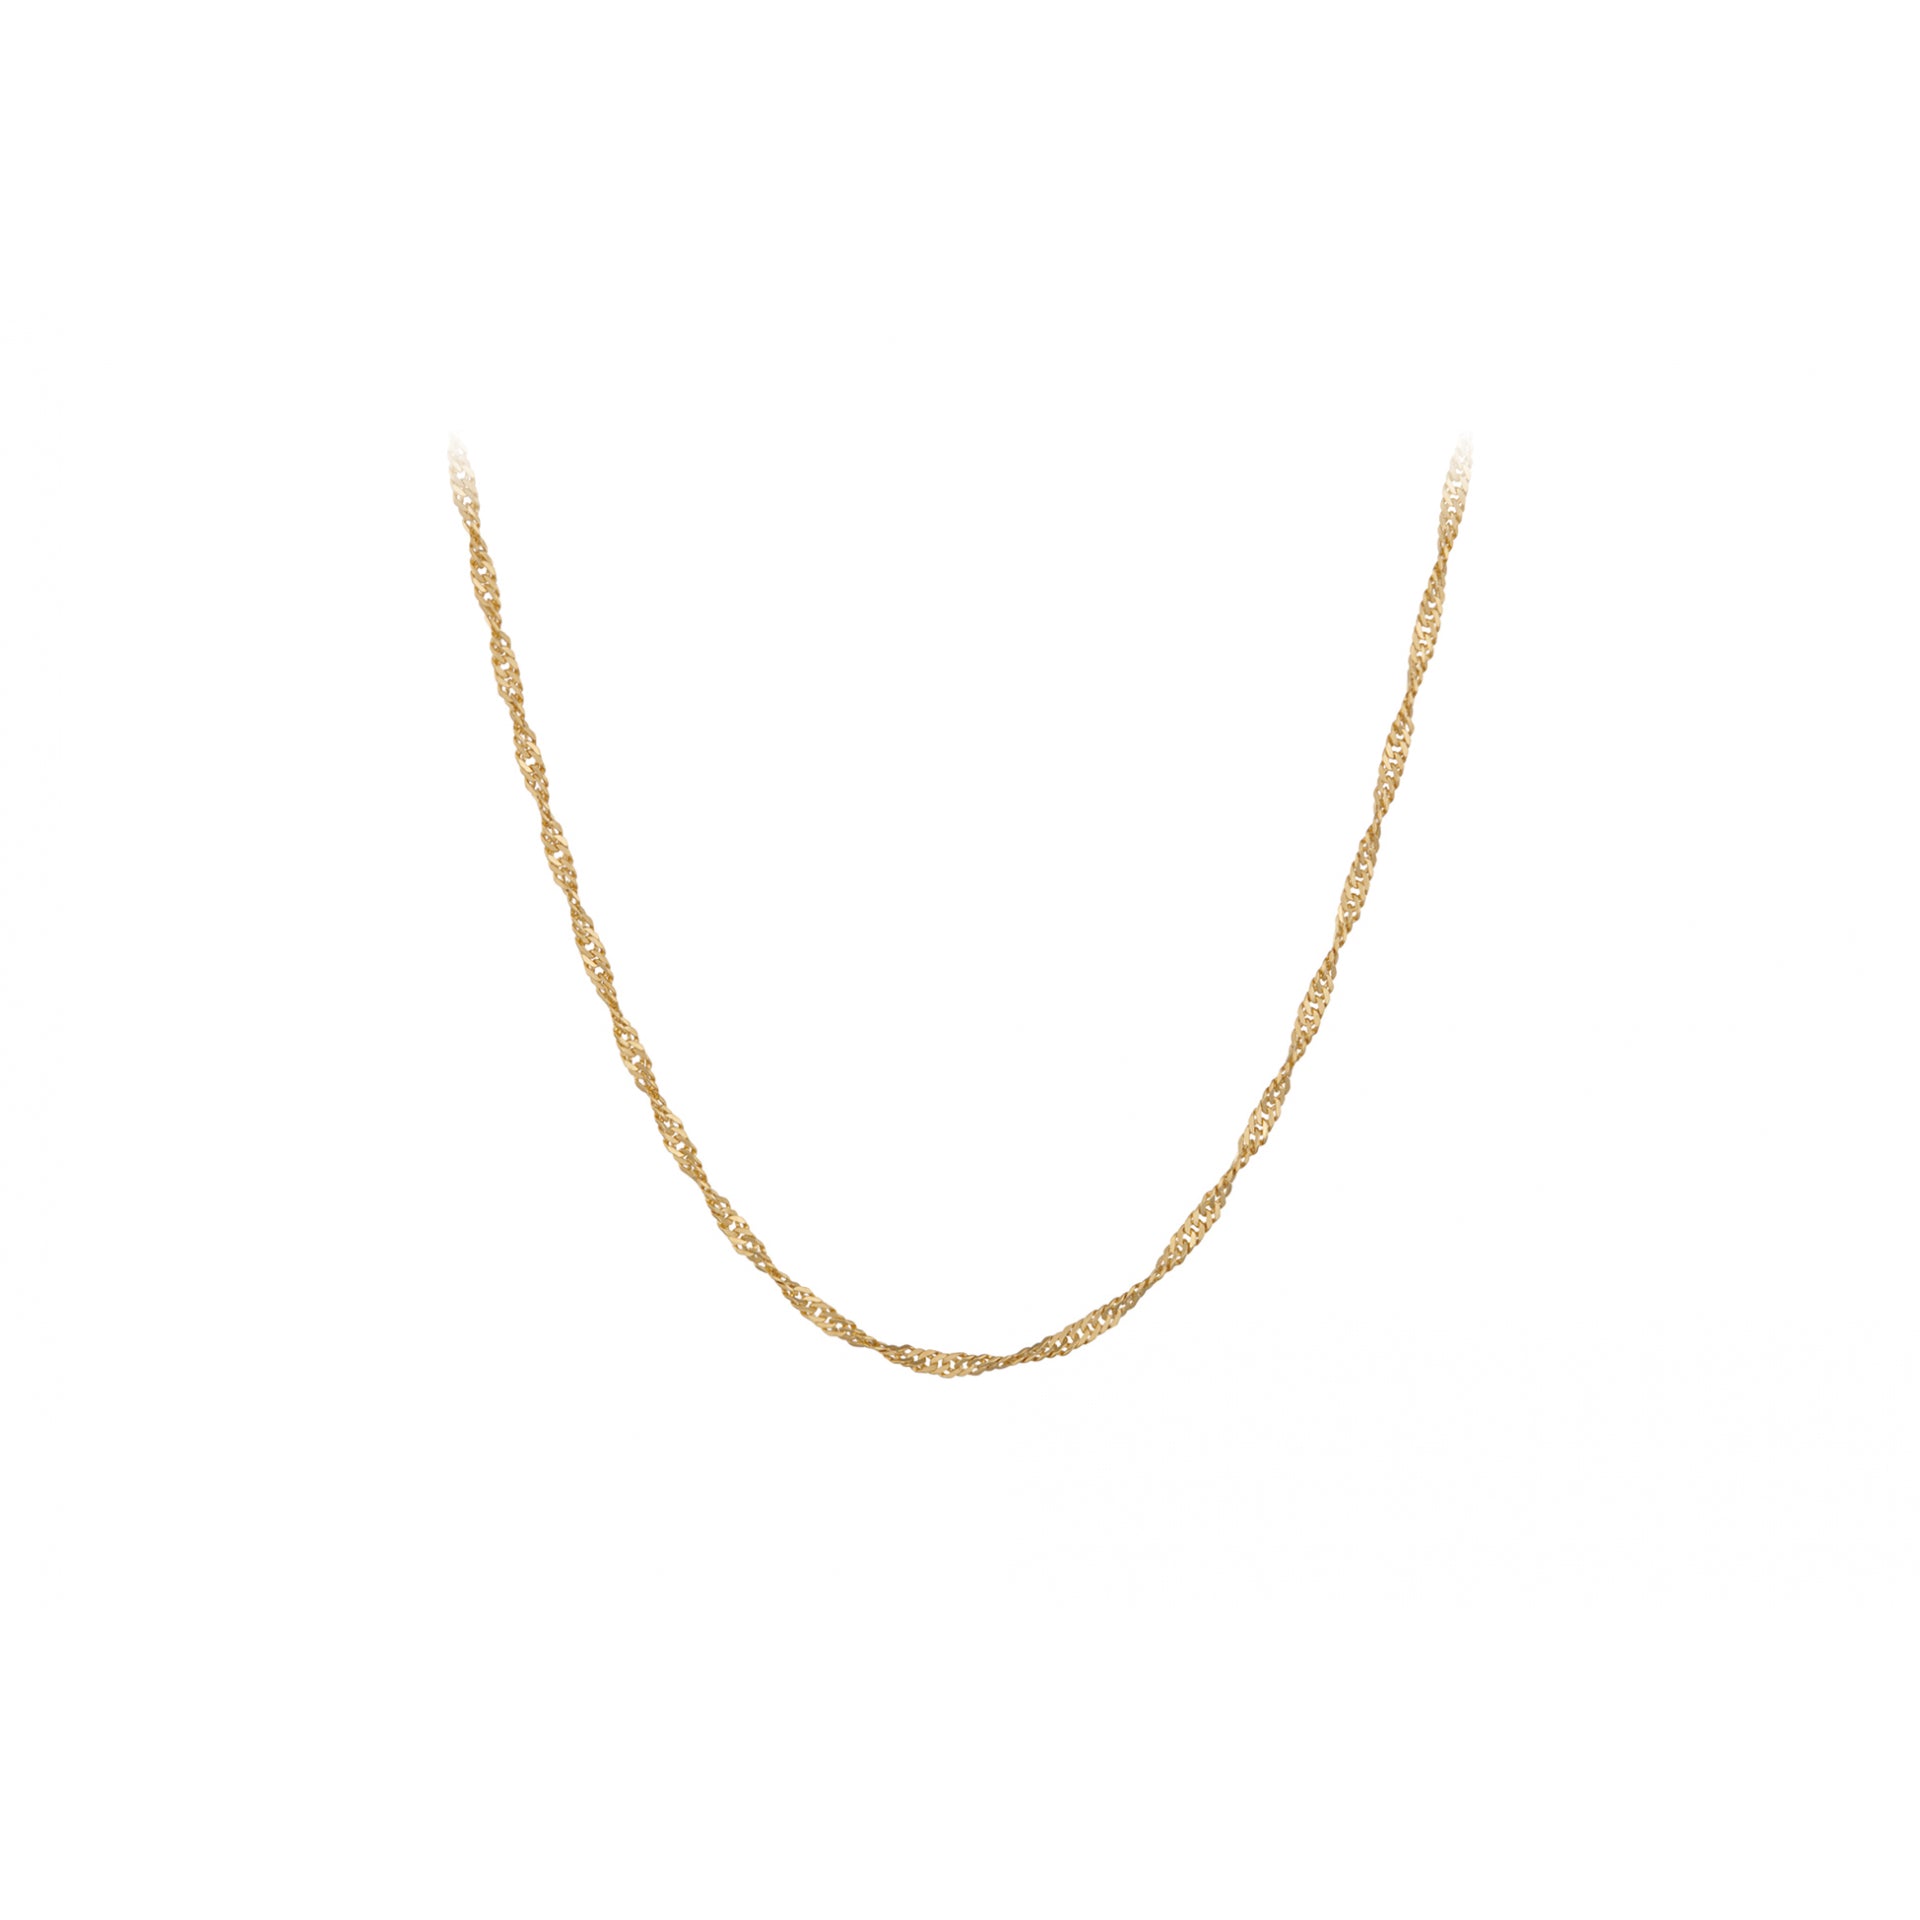 Pernille Corydon Singapore Necklace Long Gold Plated